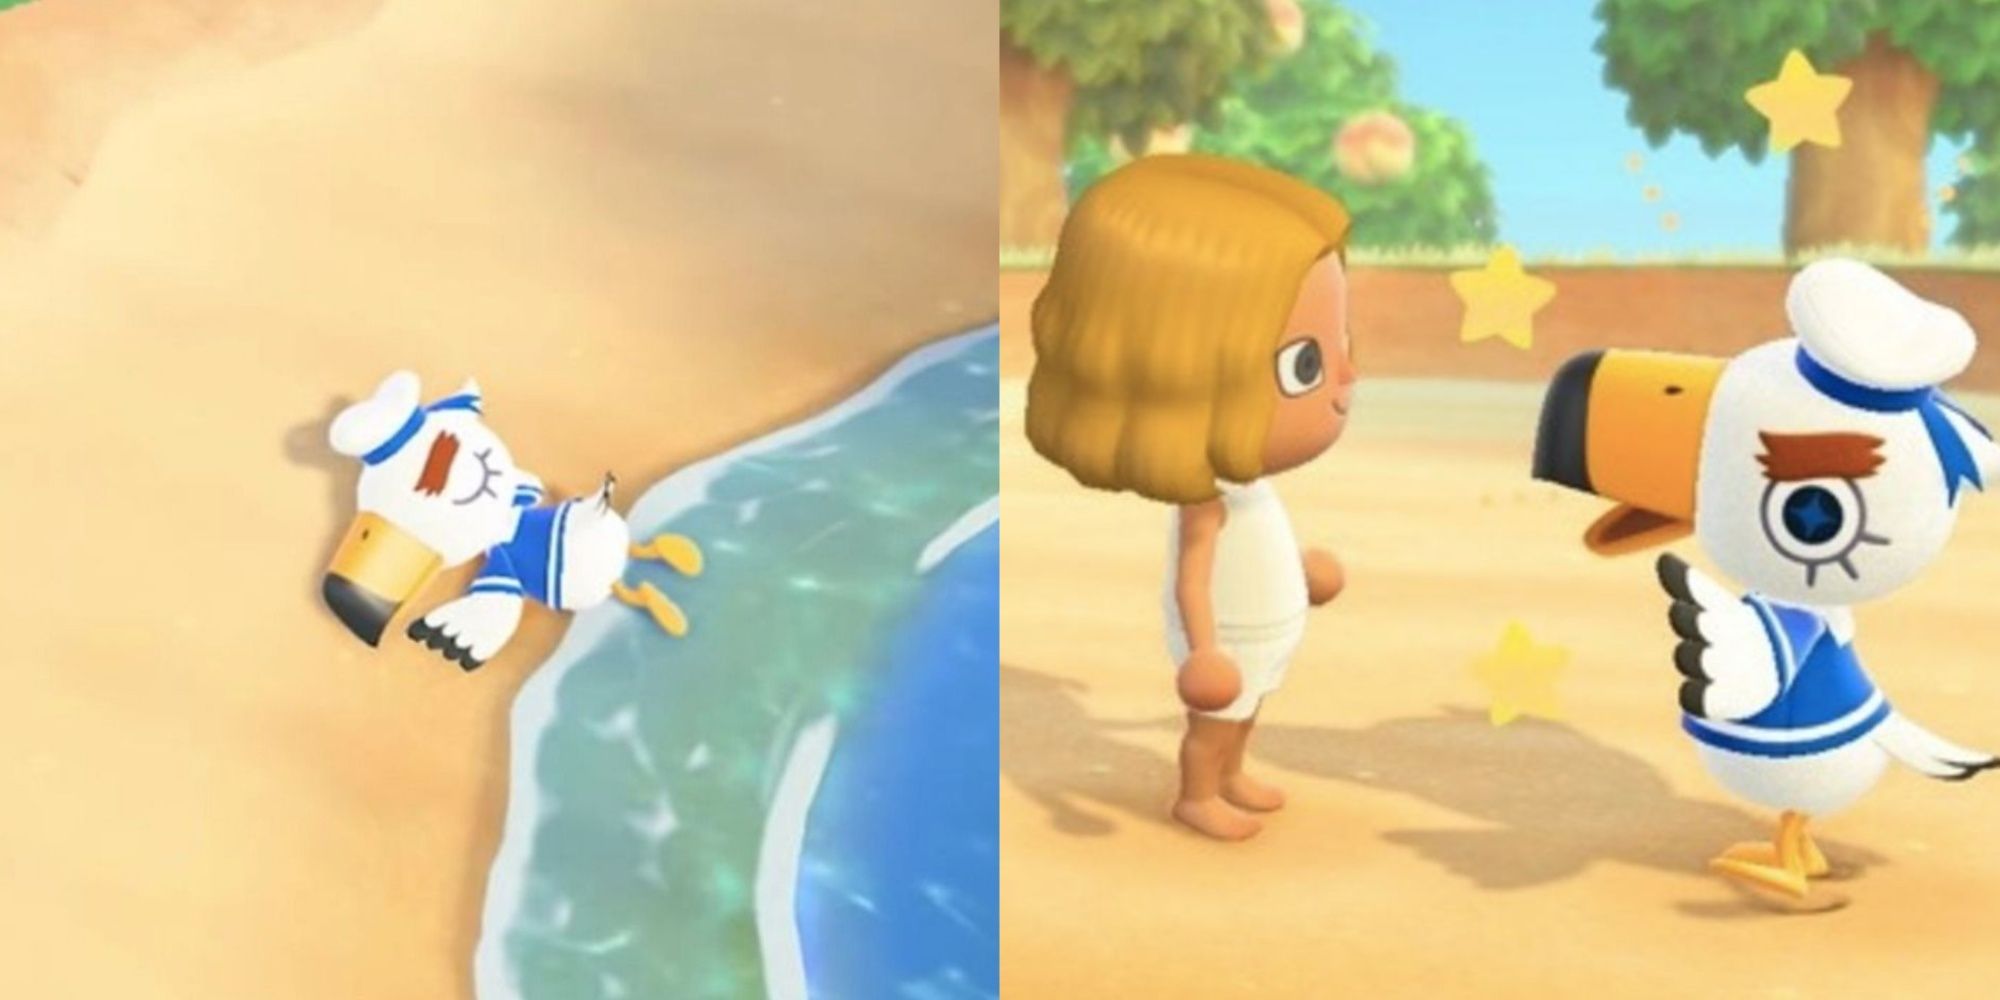 Split image of Gulliver passed out on the beach and a player with Gulliver in Animal Crossing New Horizons